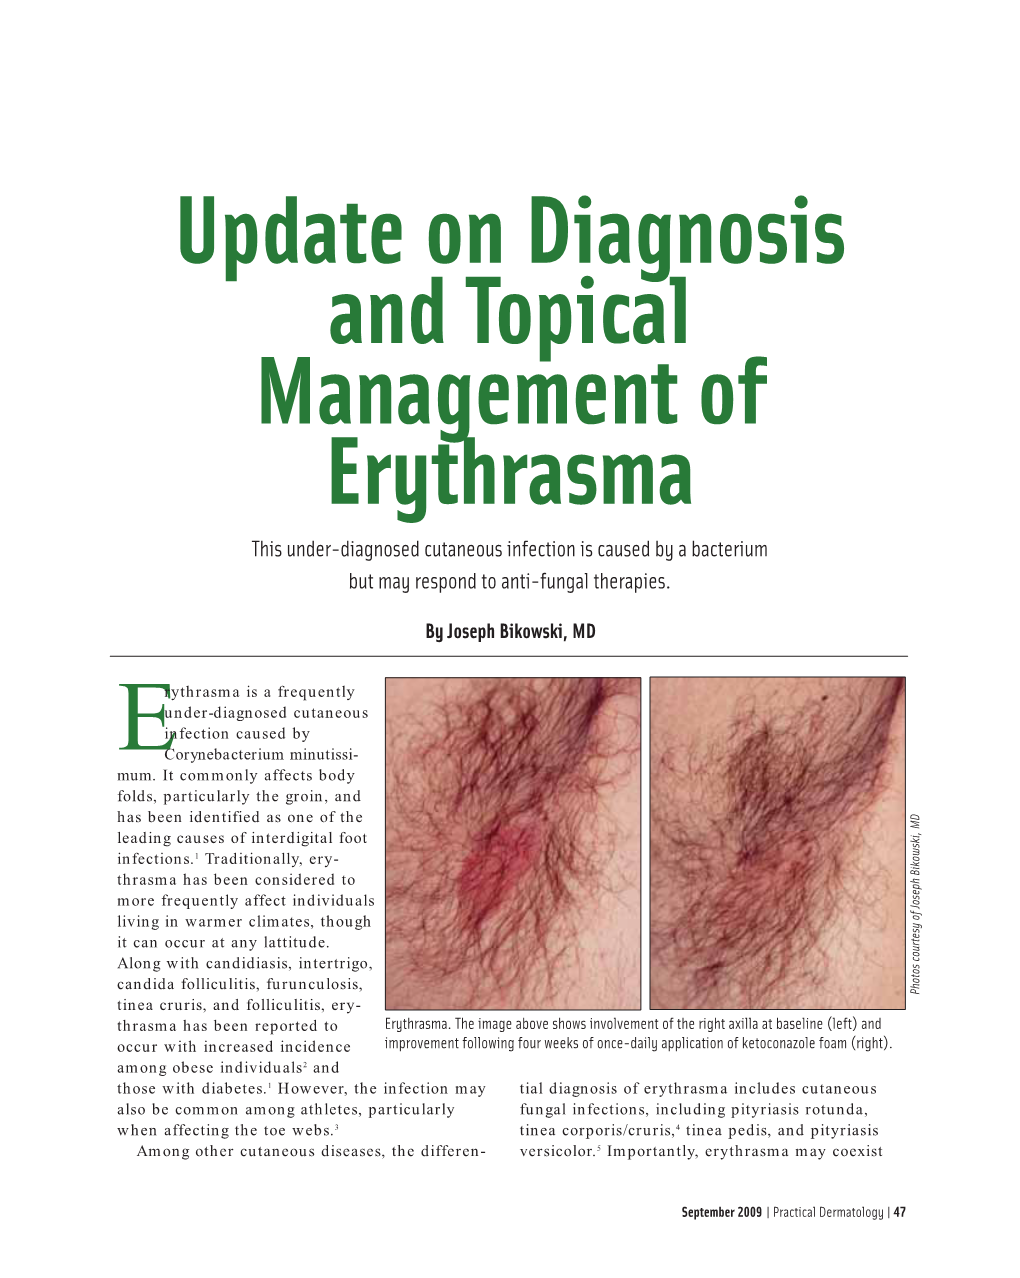 Update on Diagnosis and Topical Management of Erythrasma This Under-Diagnosed Cutaneous Infection Is Caused by a Bacterium but May Respond to Anti-Fungal Therapies